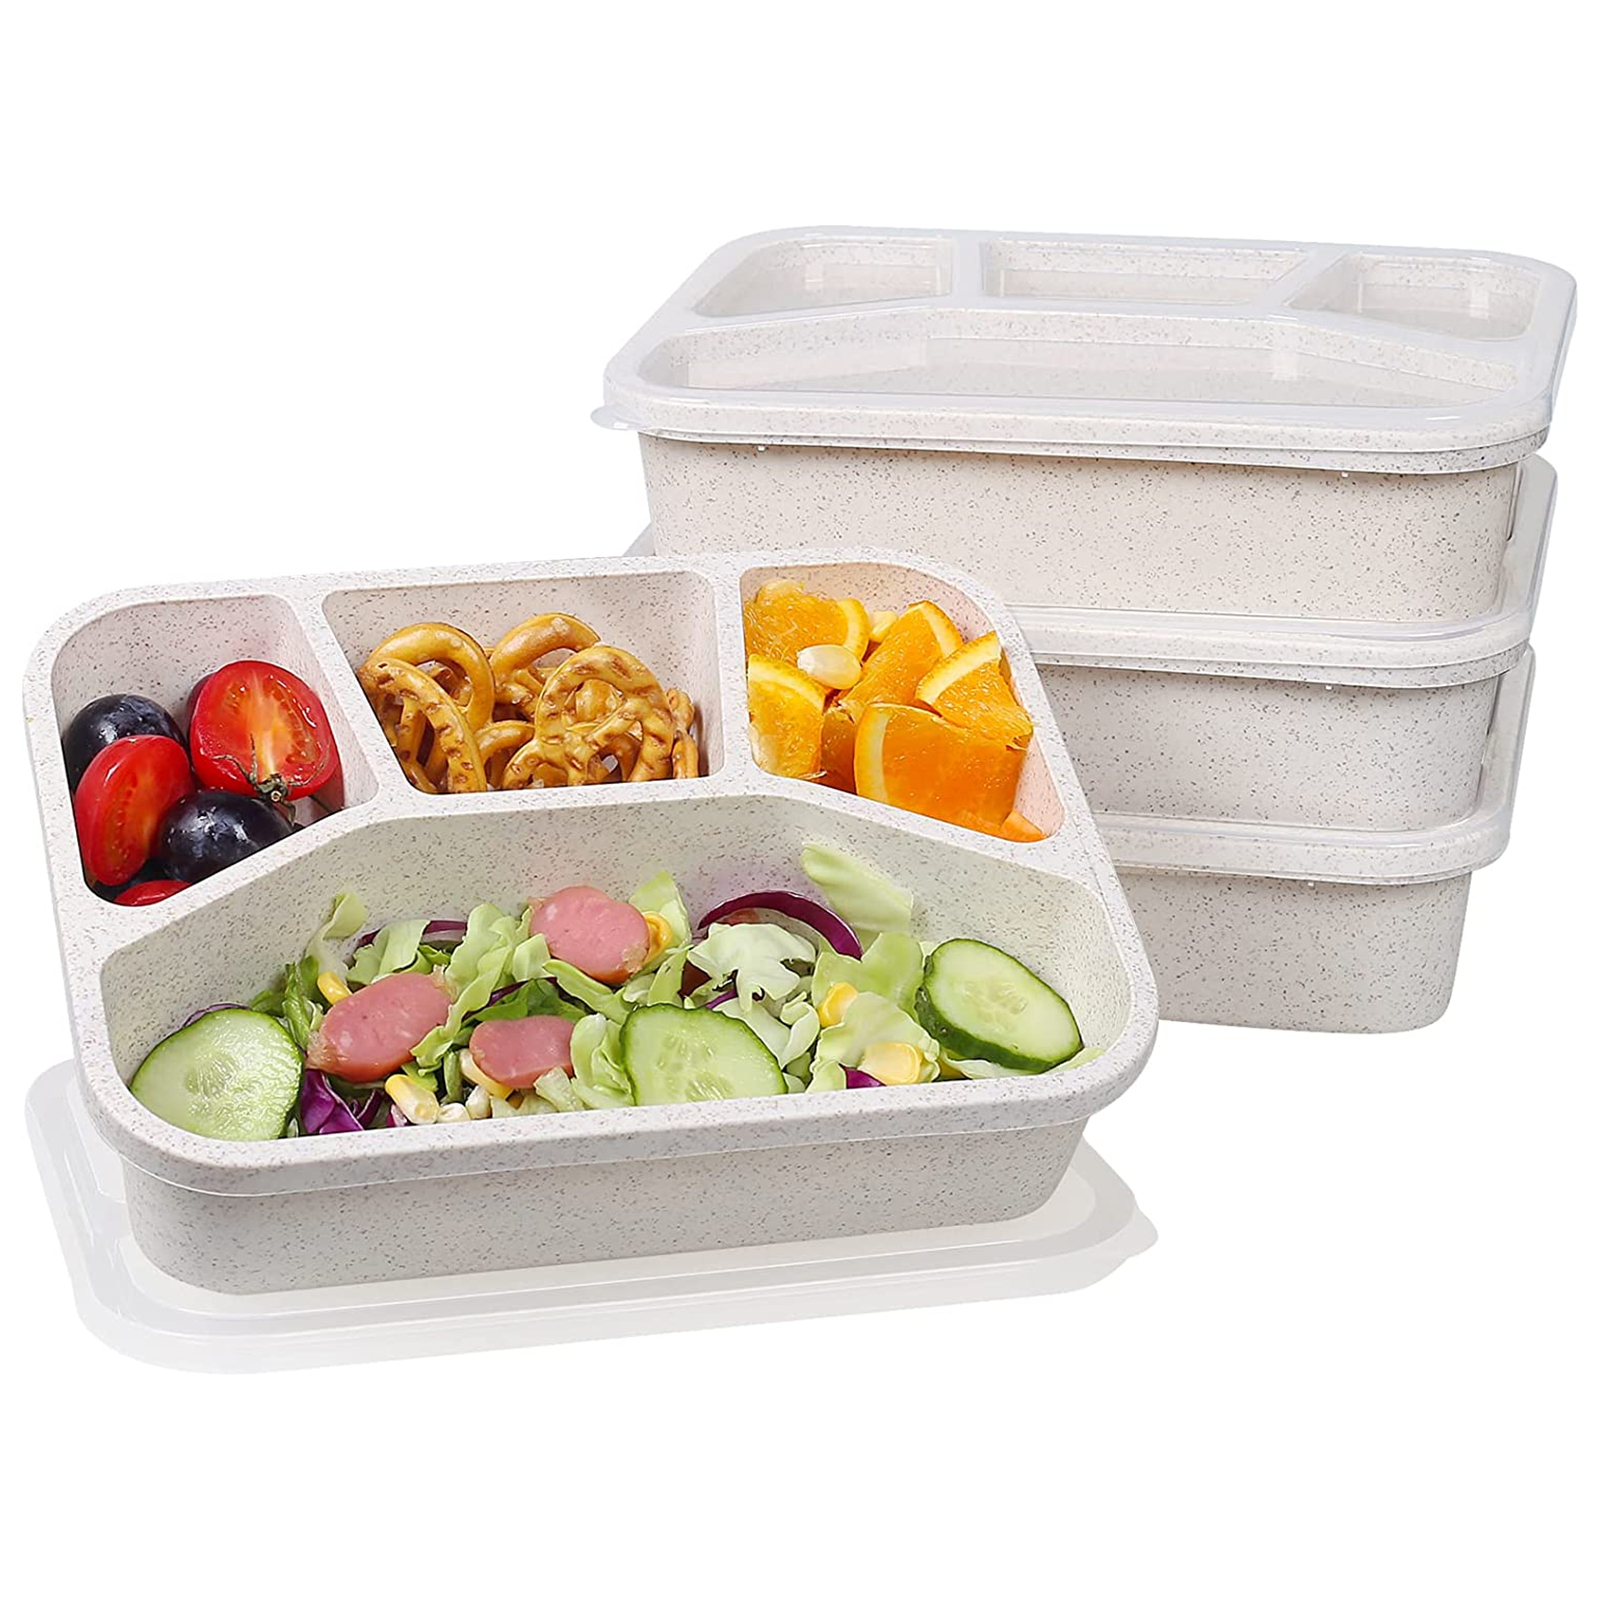 4 Compartment Disposable Food Containers, Bento Lunch Box,Whatsapp